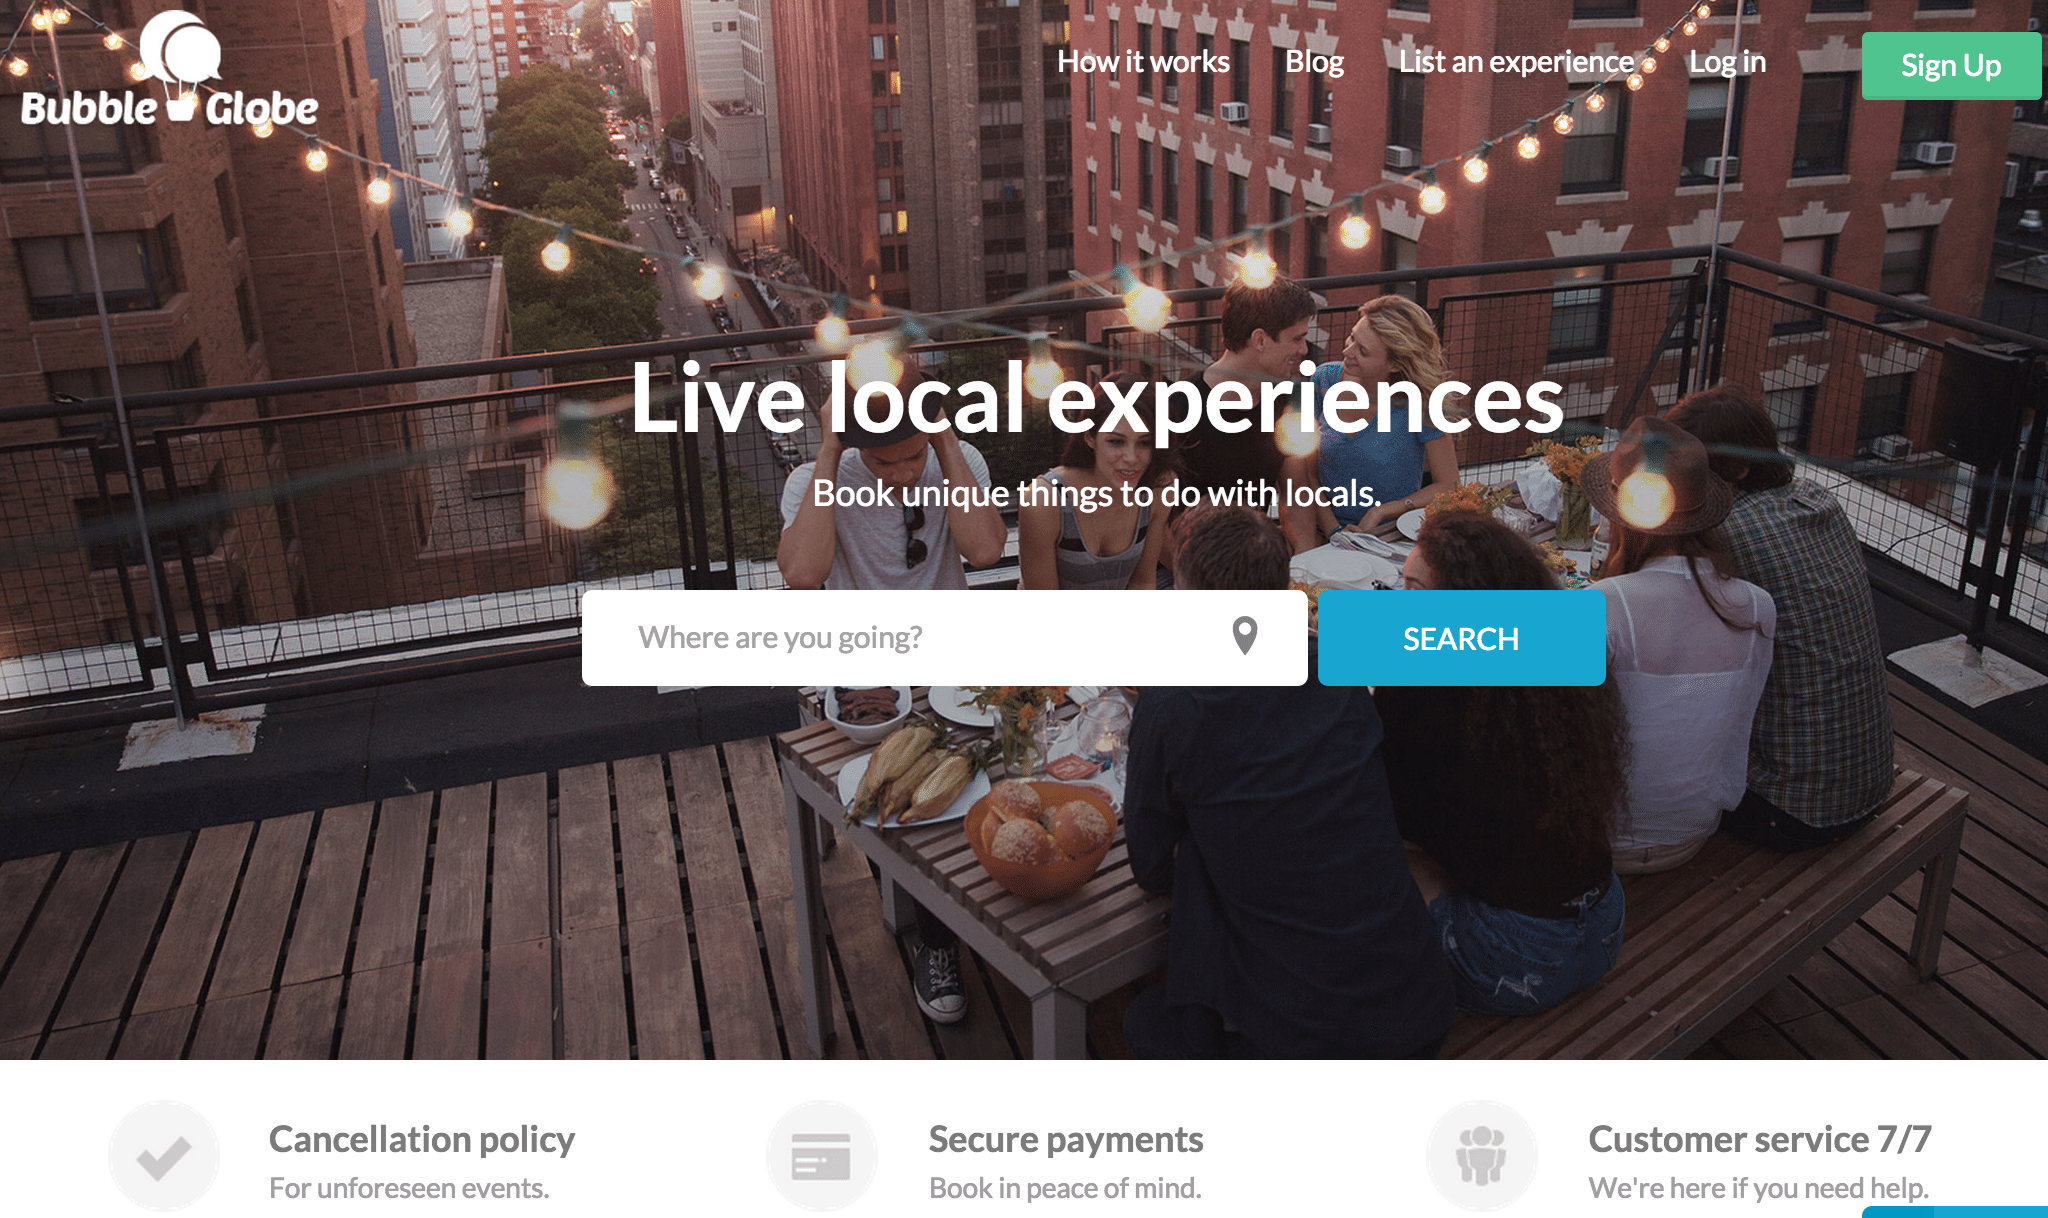 BubbleGlobe helps travelers book authentic experiences hosted by locals while traveling or in their own city.